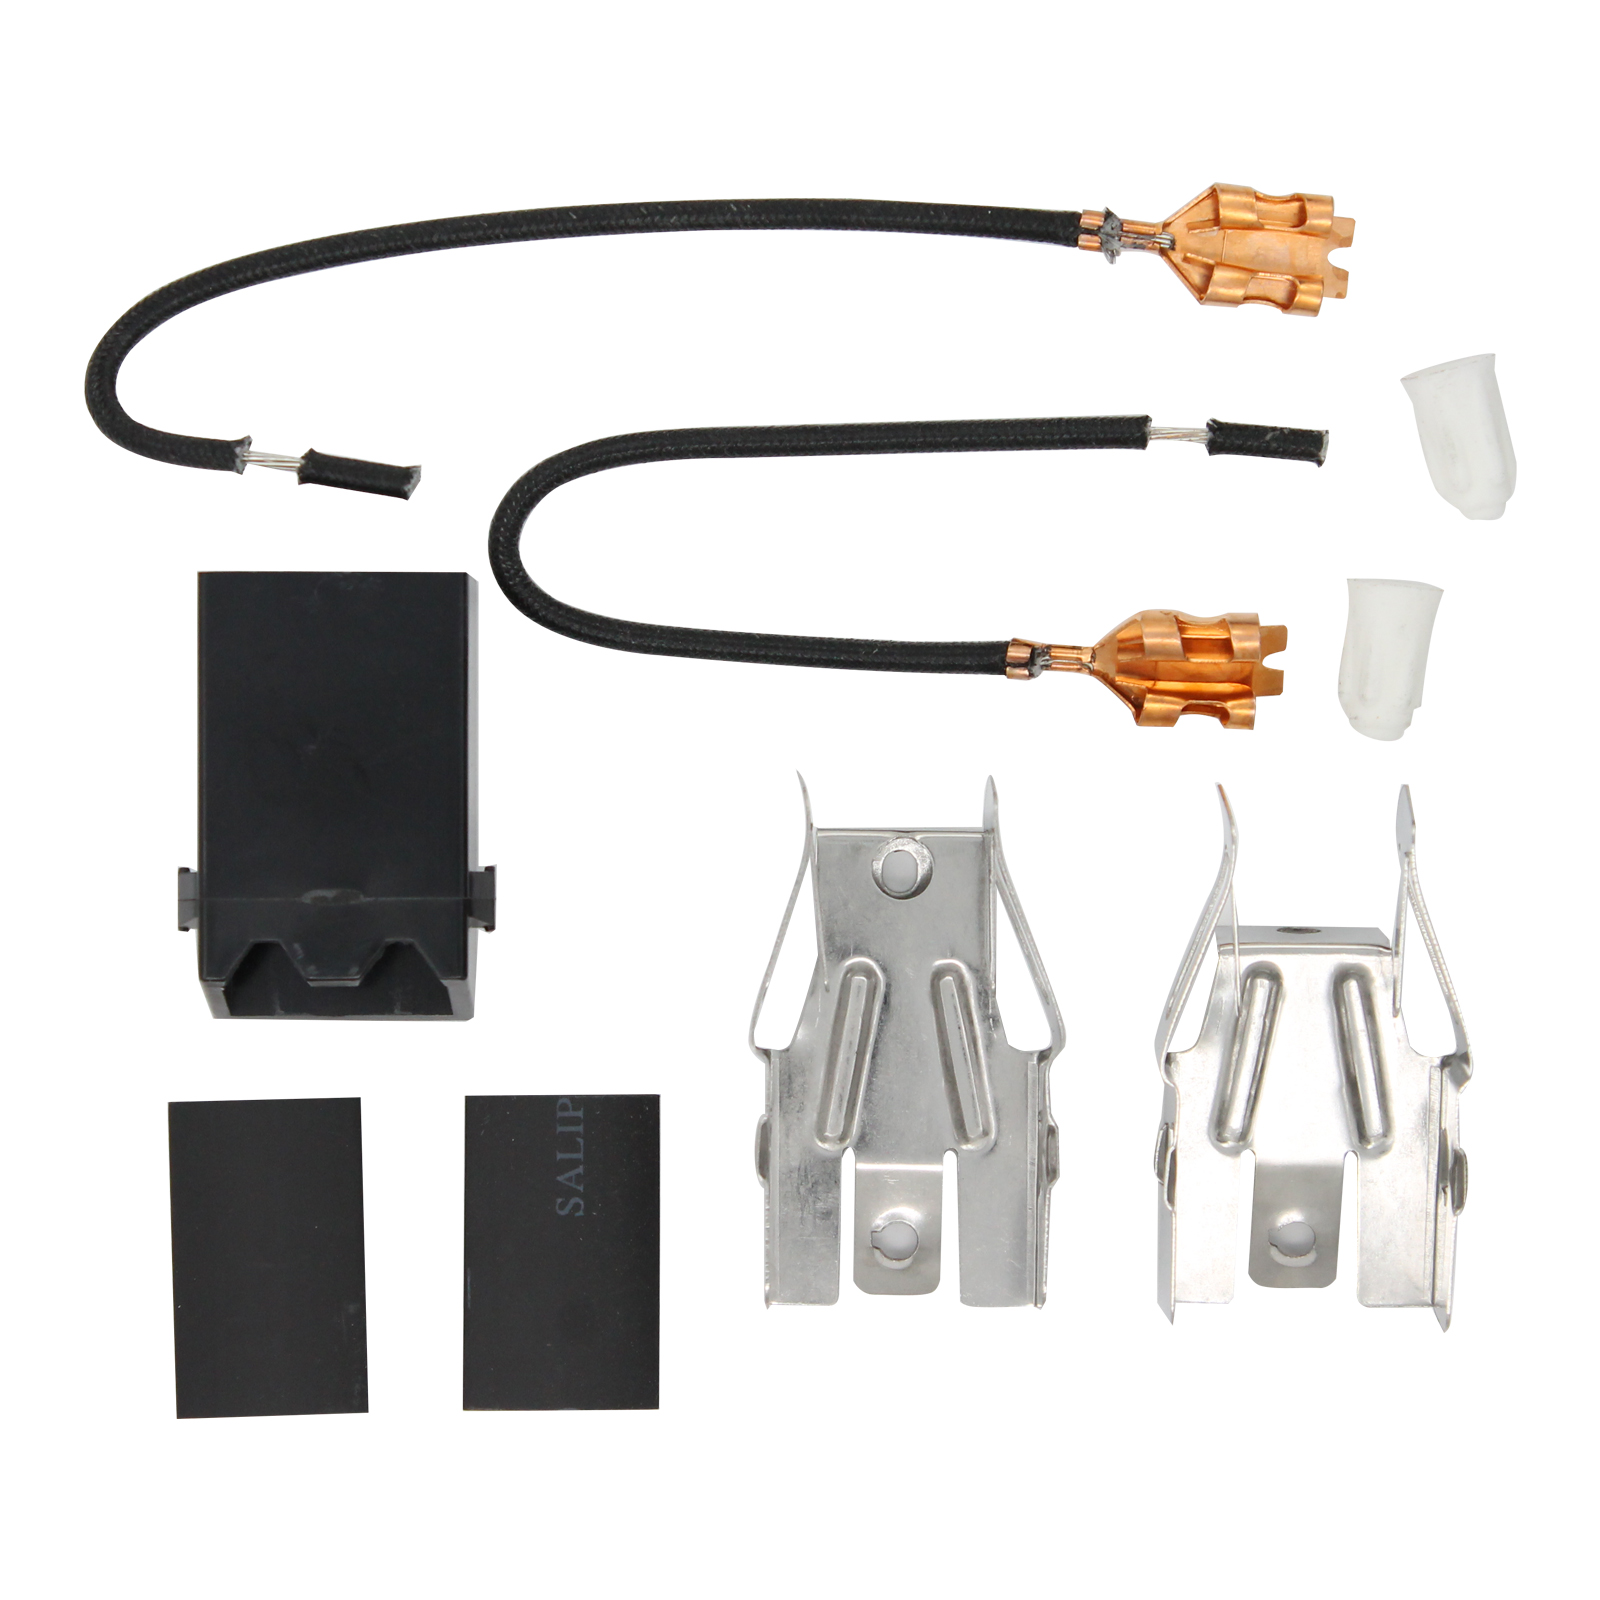 330031 Top Burner Receptacle Kit Replacement for Amana ARR6400LL (P1143820NLL) Range/Cooktop/Oven - Compatible with 330031 Range Burner Receptacle Kit - UpStart Components Brand - image 4 of 4